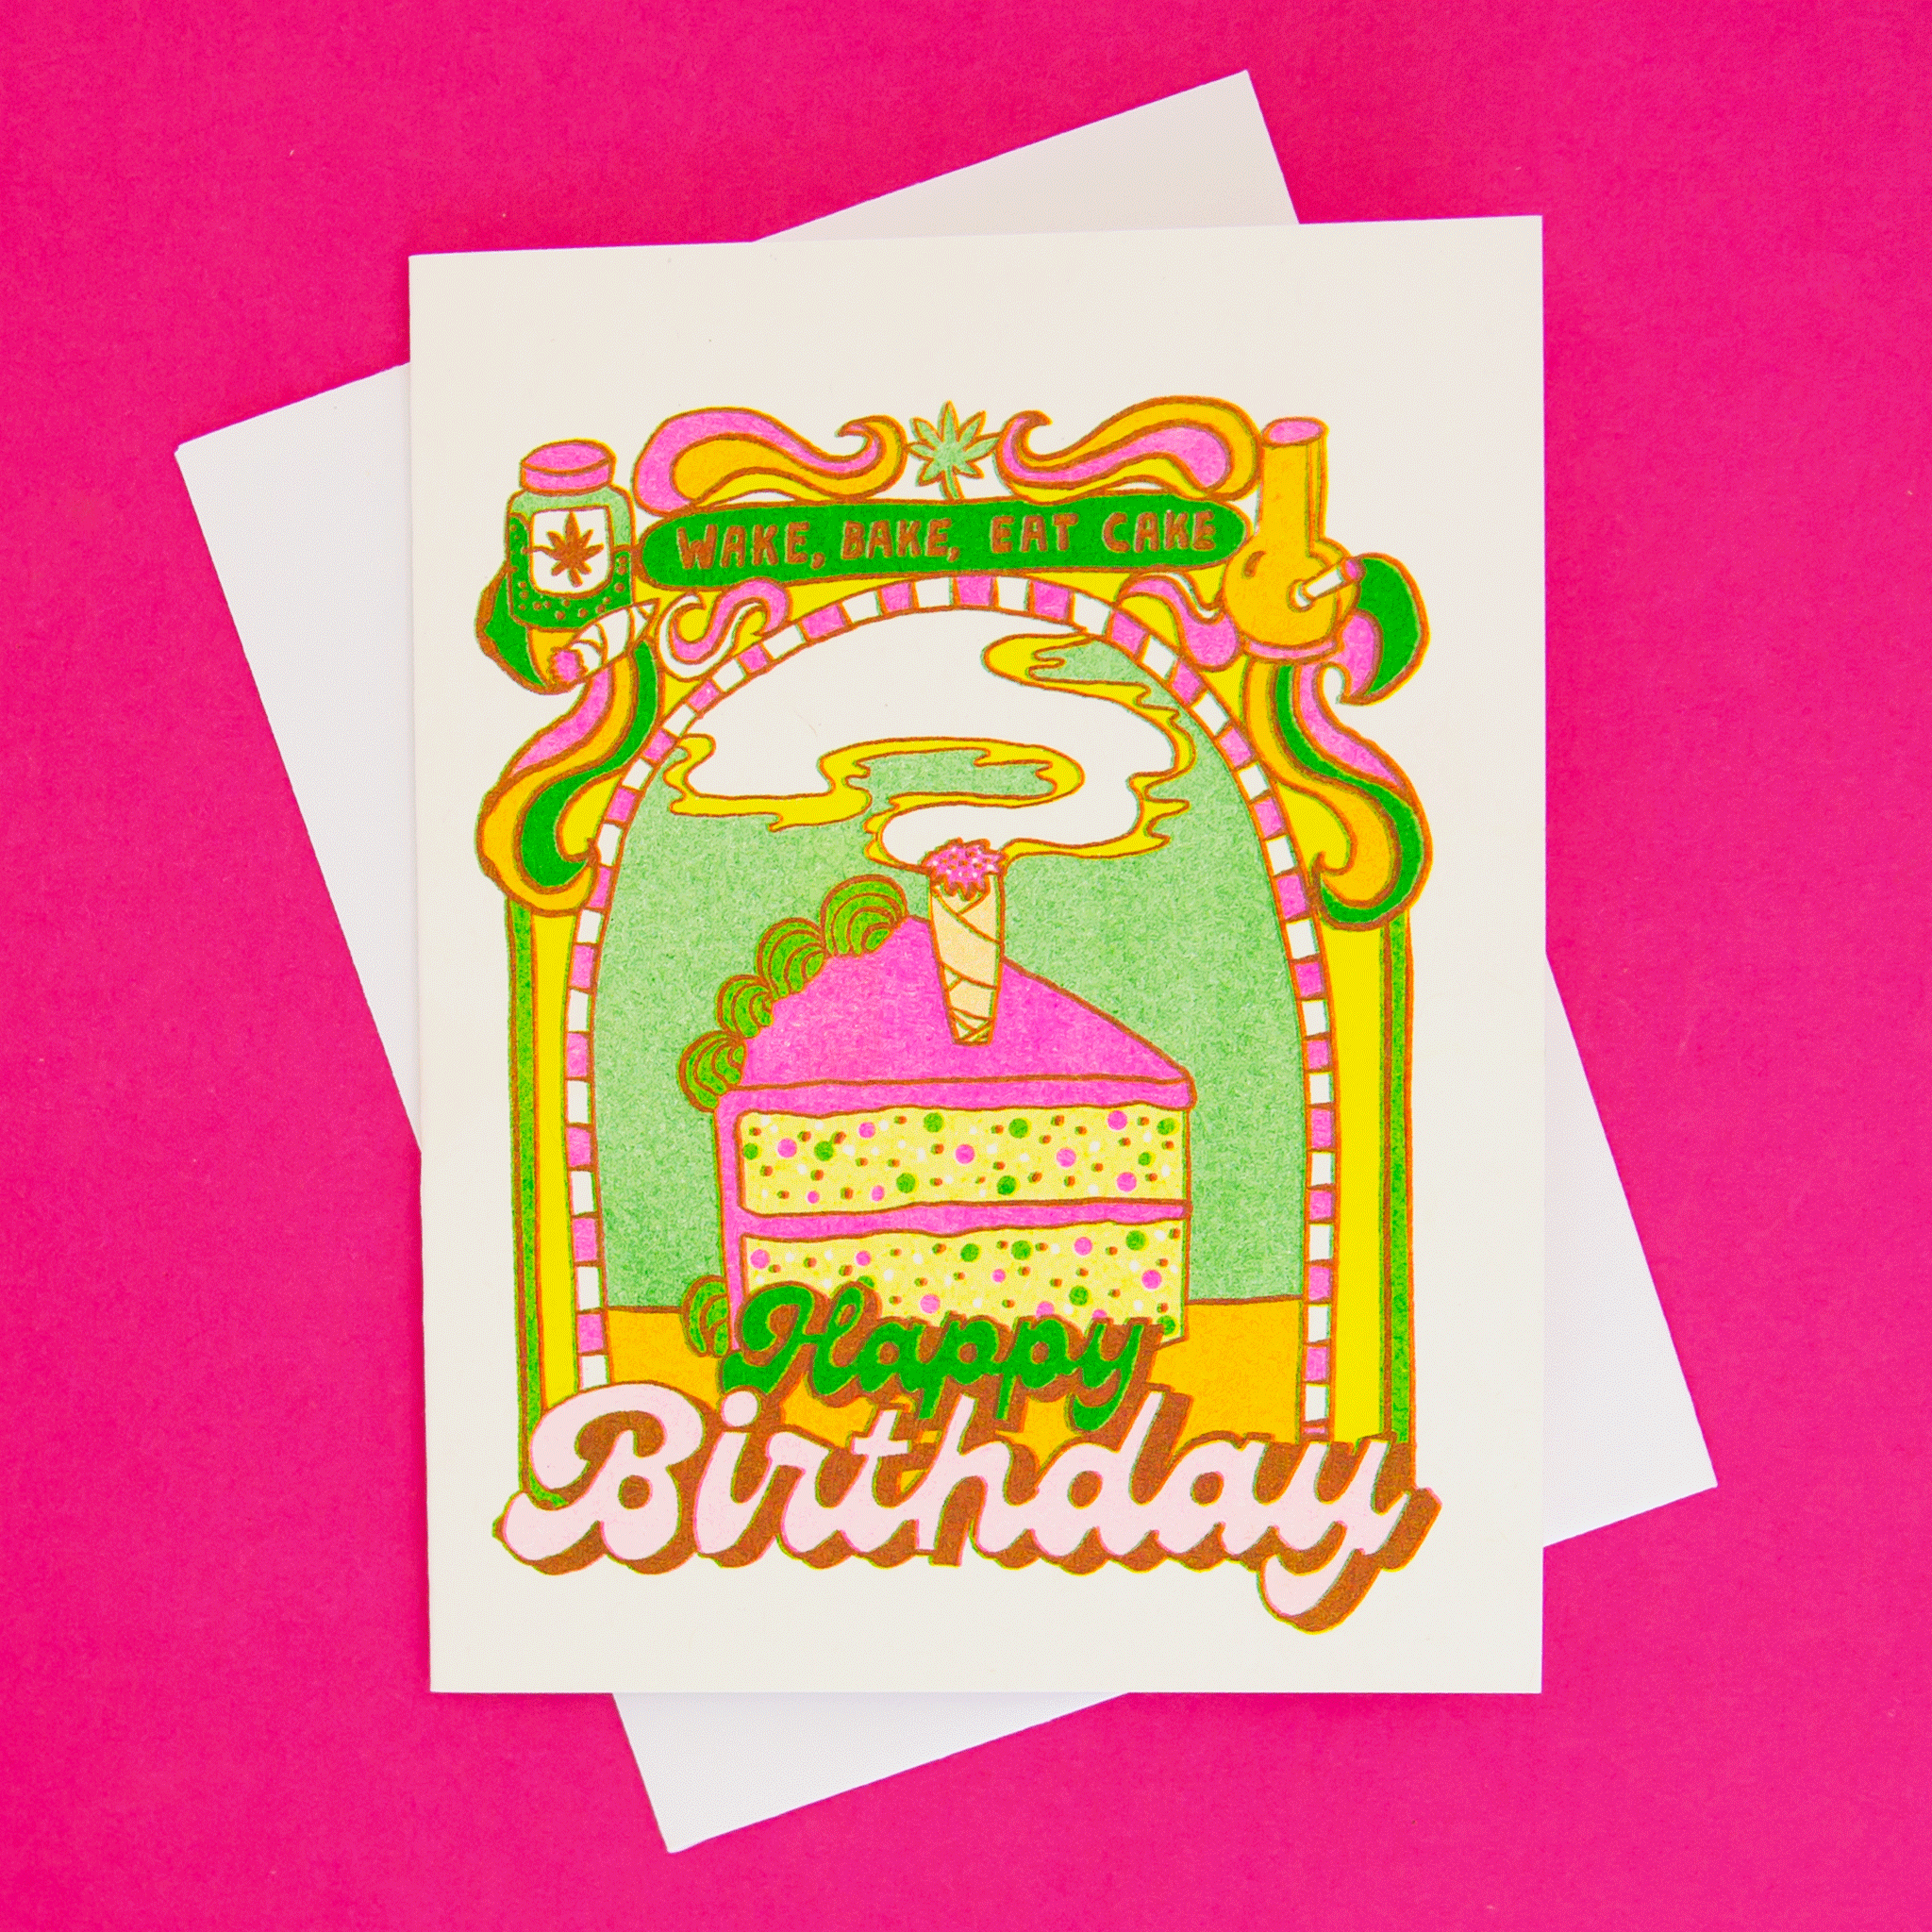 On a hot pink background is a colorful green, yellow and pink card with a cake illustration in the center with a pre-roll in the center and text that reads, "Wake, Bake, Eat Cake Happy Birthday".